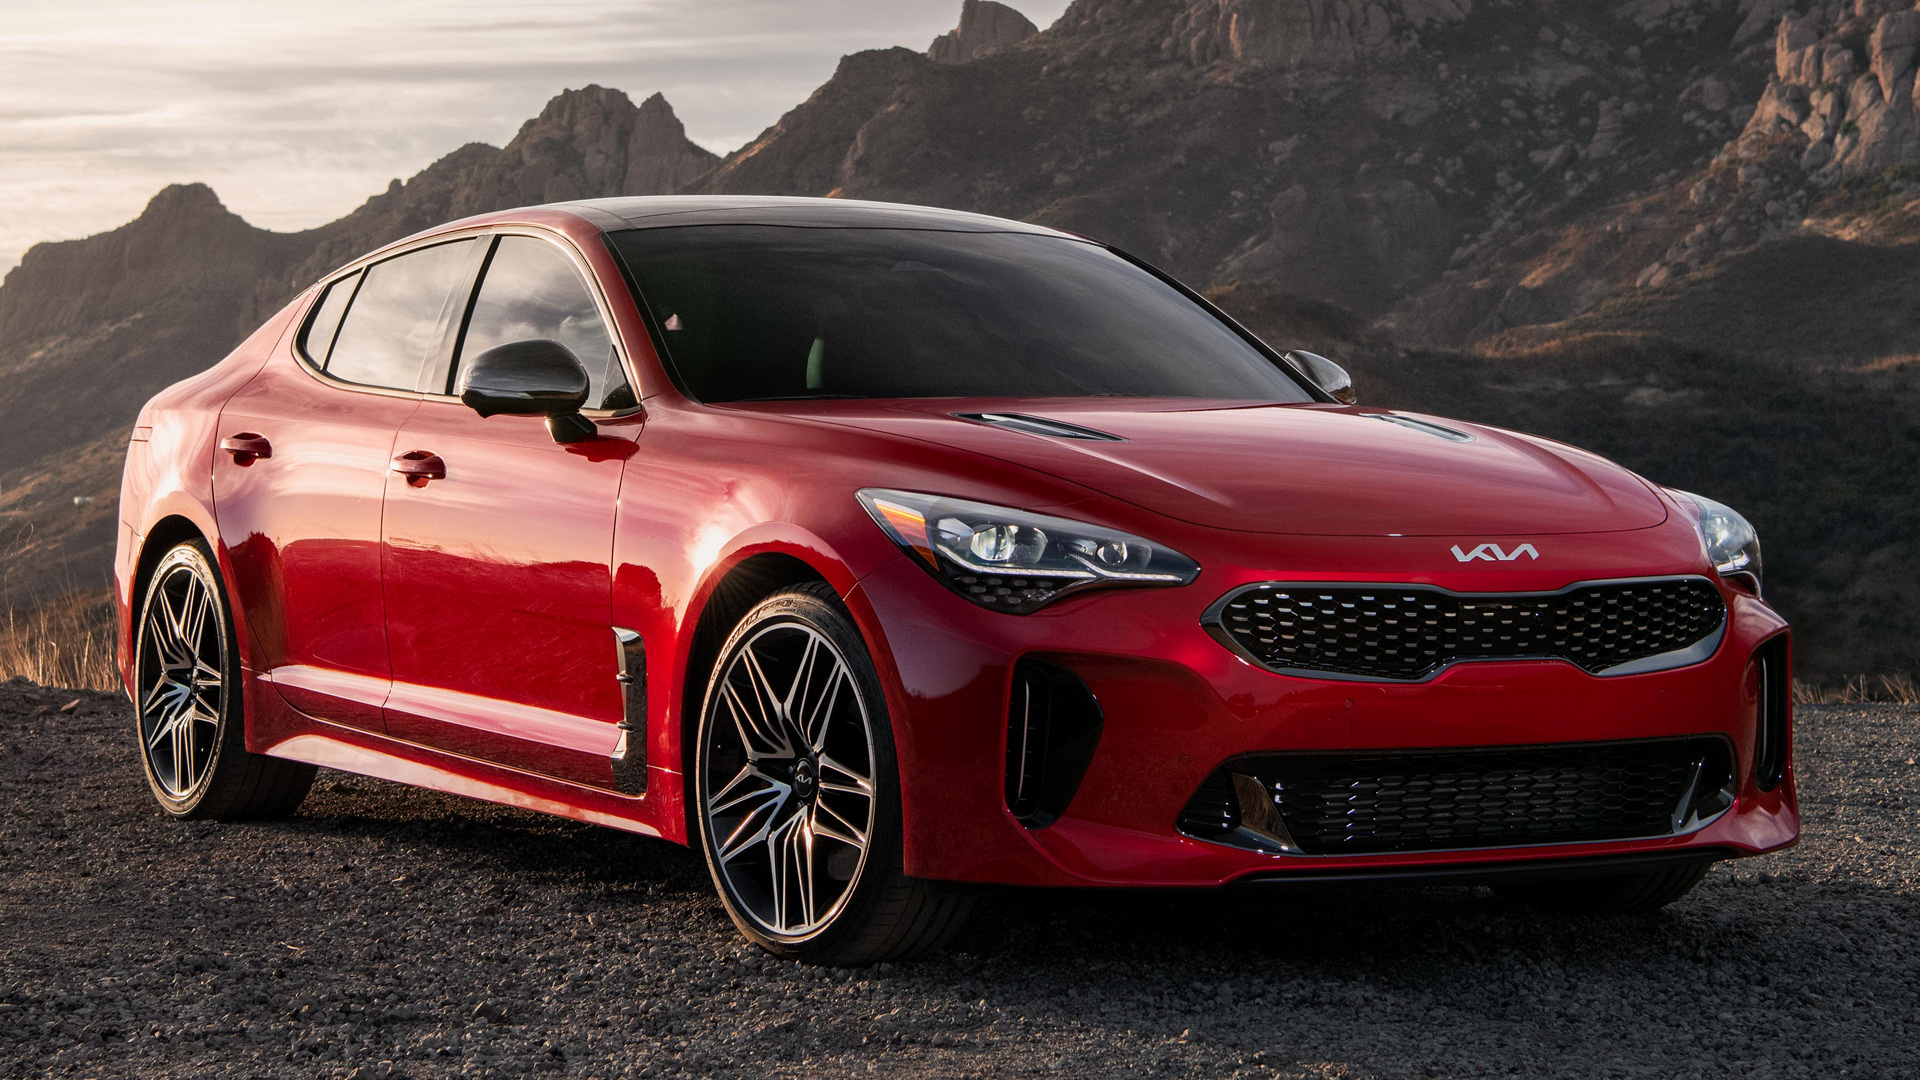 Kia Stinger, Performance-driven, High-definition wallpapers, Unmatched style, 1920x1080 Full HD Desktop